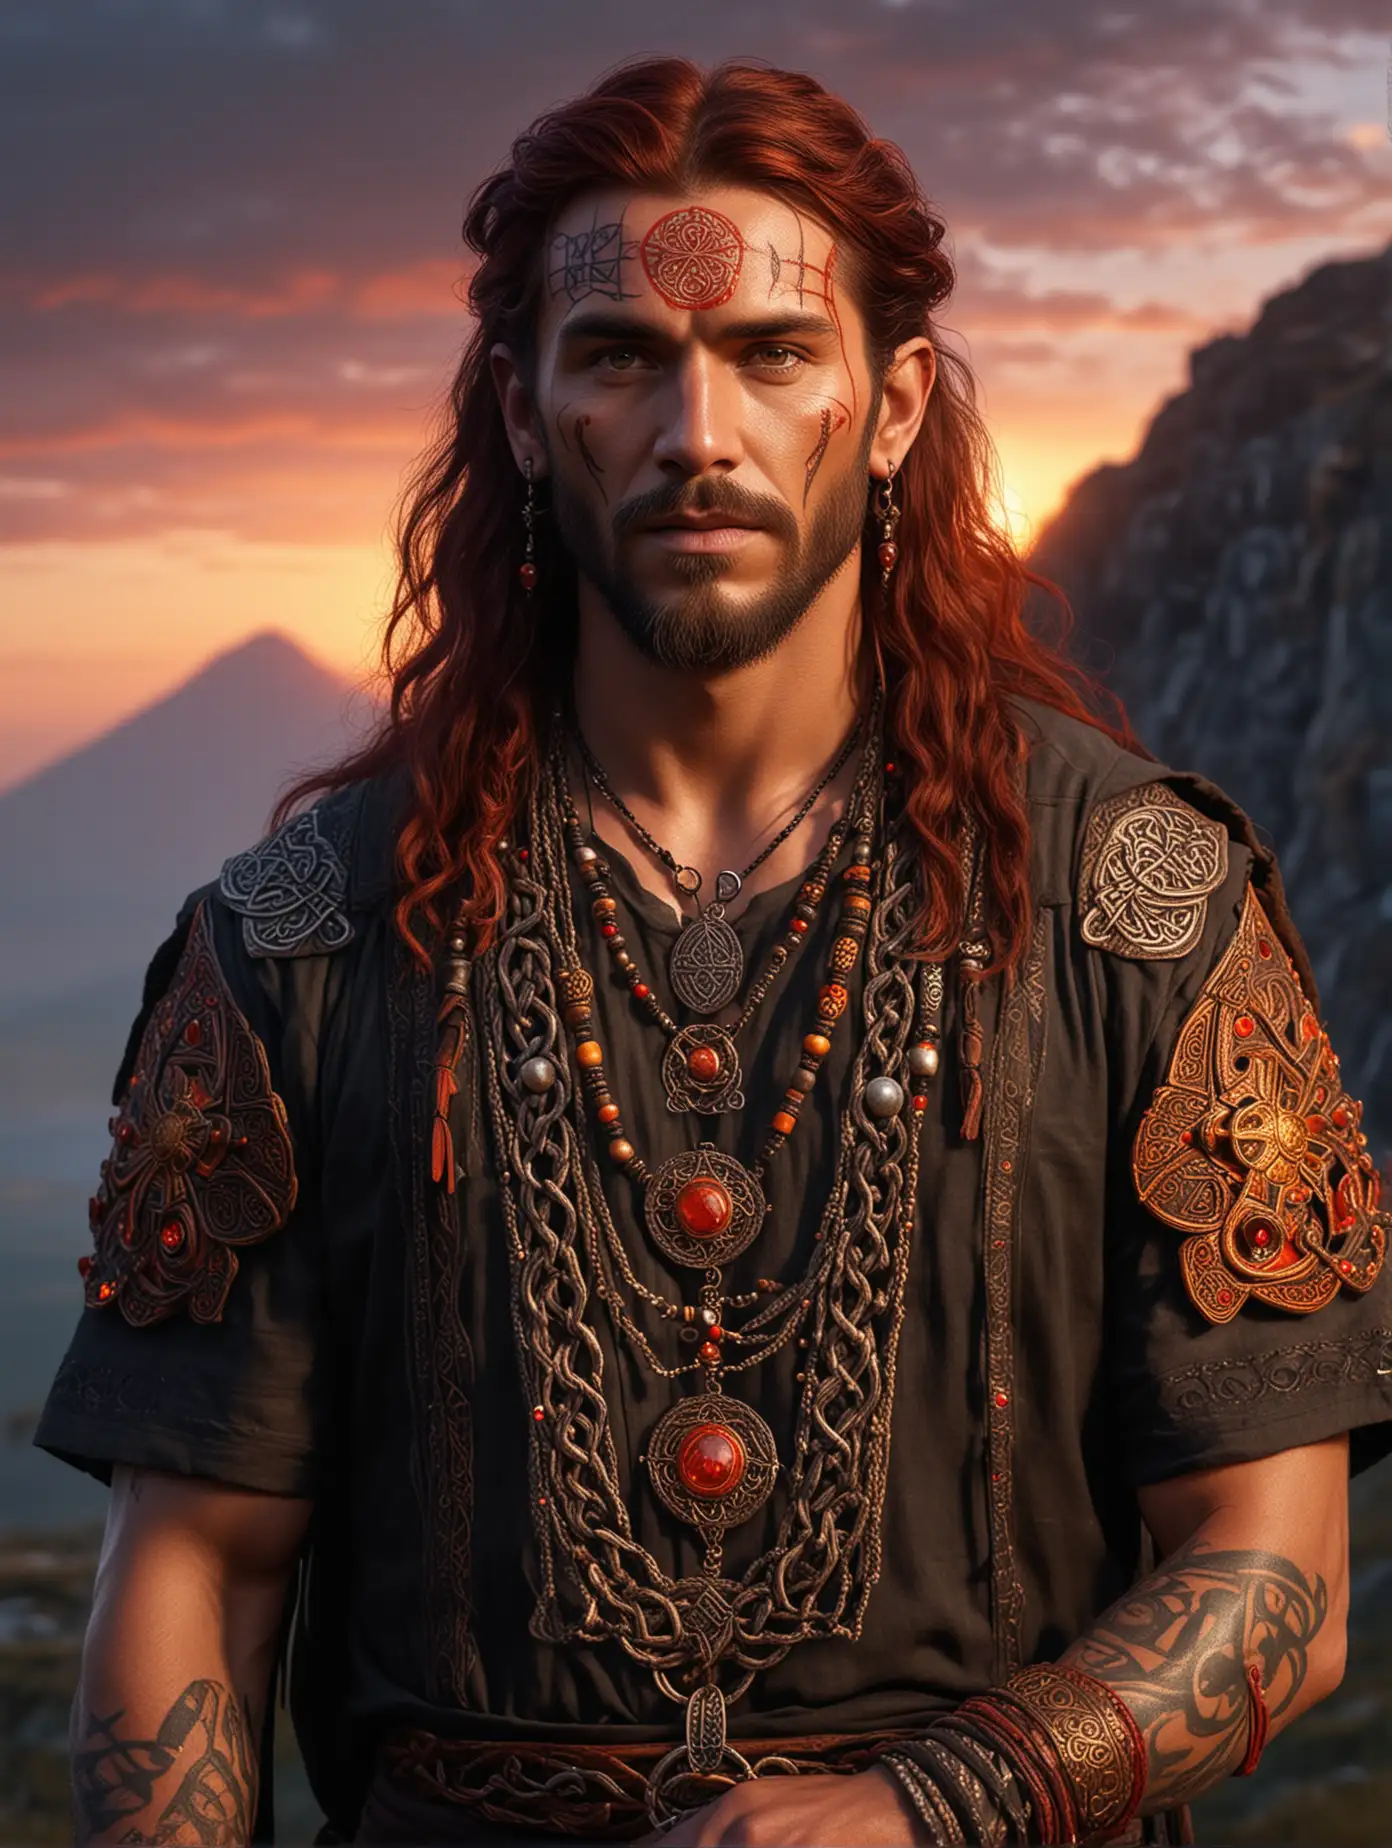 A nice celtic male shaman with red tattoos, a very dark reddish hair wearing a dark tunic, adorned with red and orange gems, many golden mystical signs : 1.|Volcano in the back and sparckles : 1.|lanterns : .9|Very detailed, sunset, nordic atmosphere : 1.|Highly detailed,high precision,focus on textures, hyperrealistic : 1.